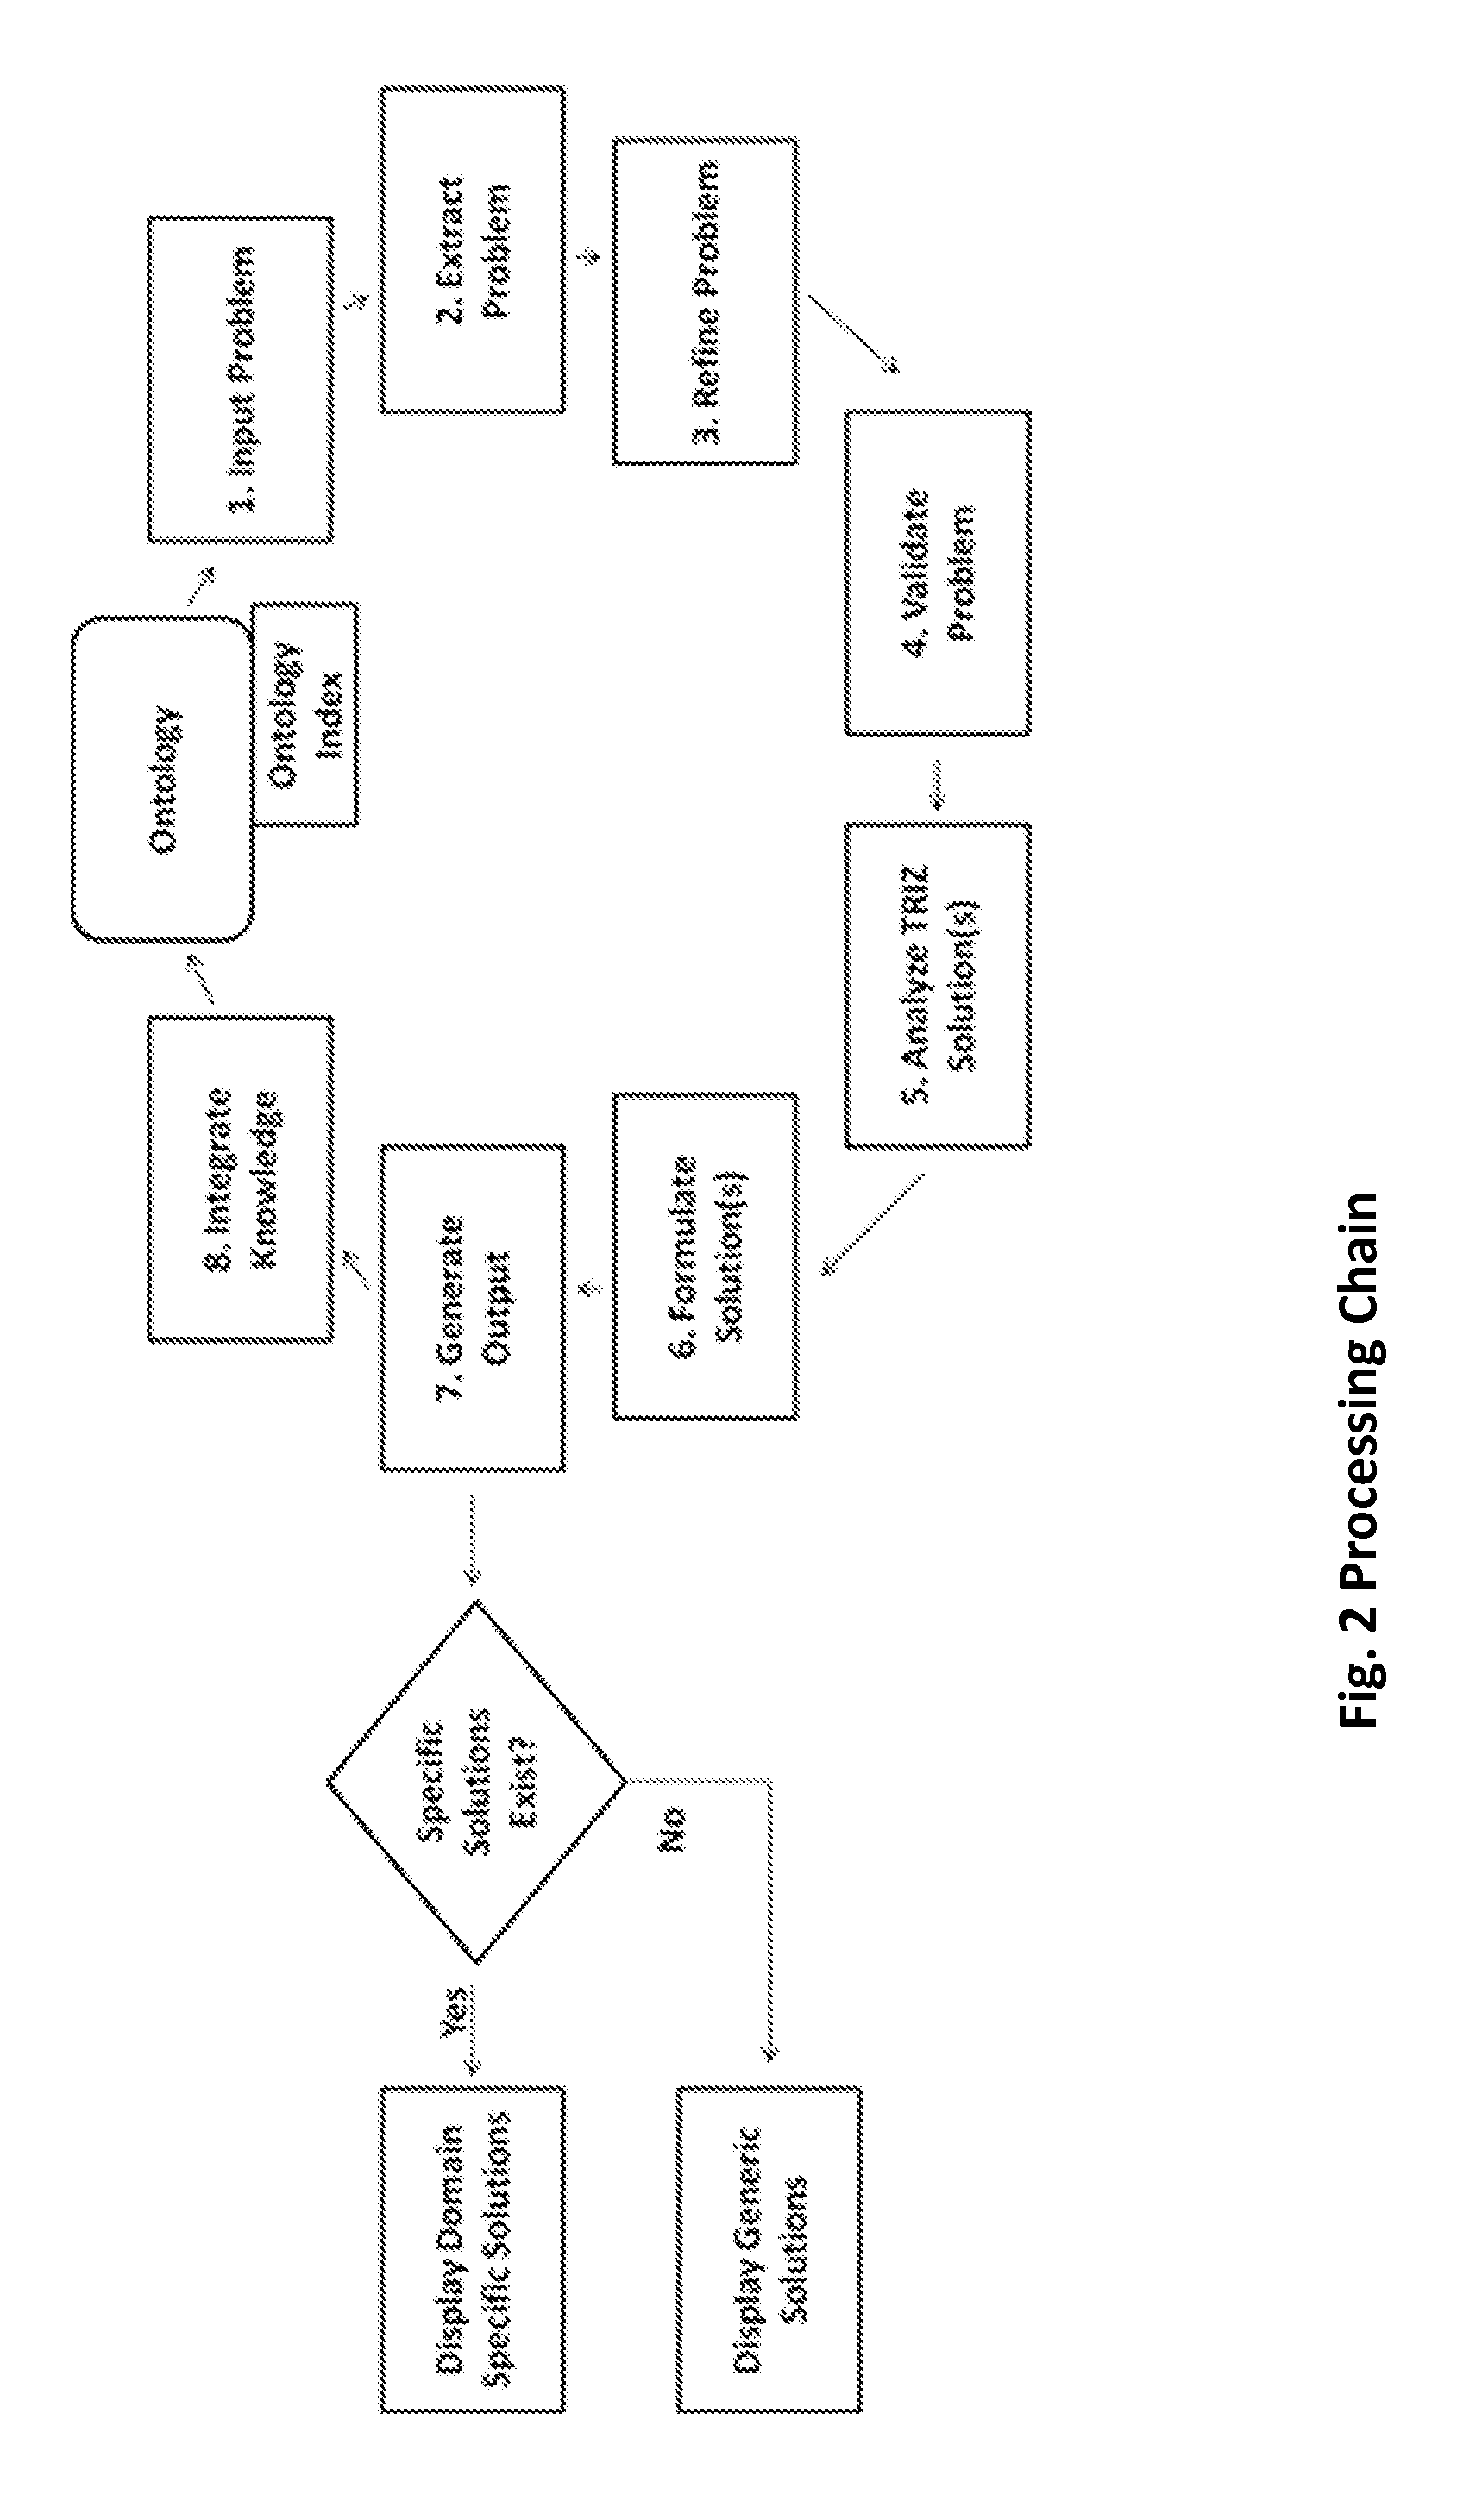 Business triz problem extractor and solver system and method